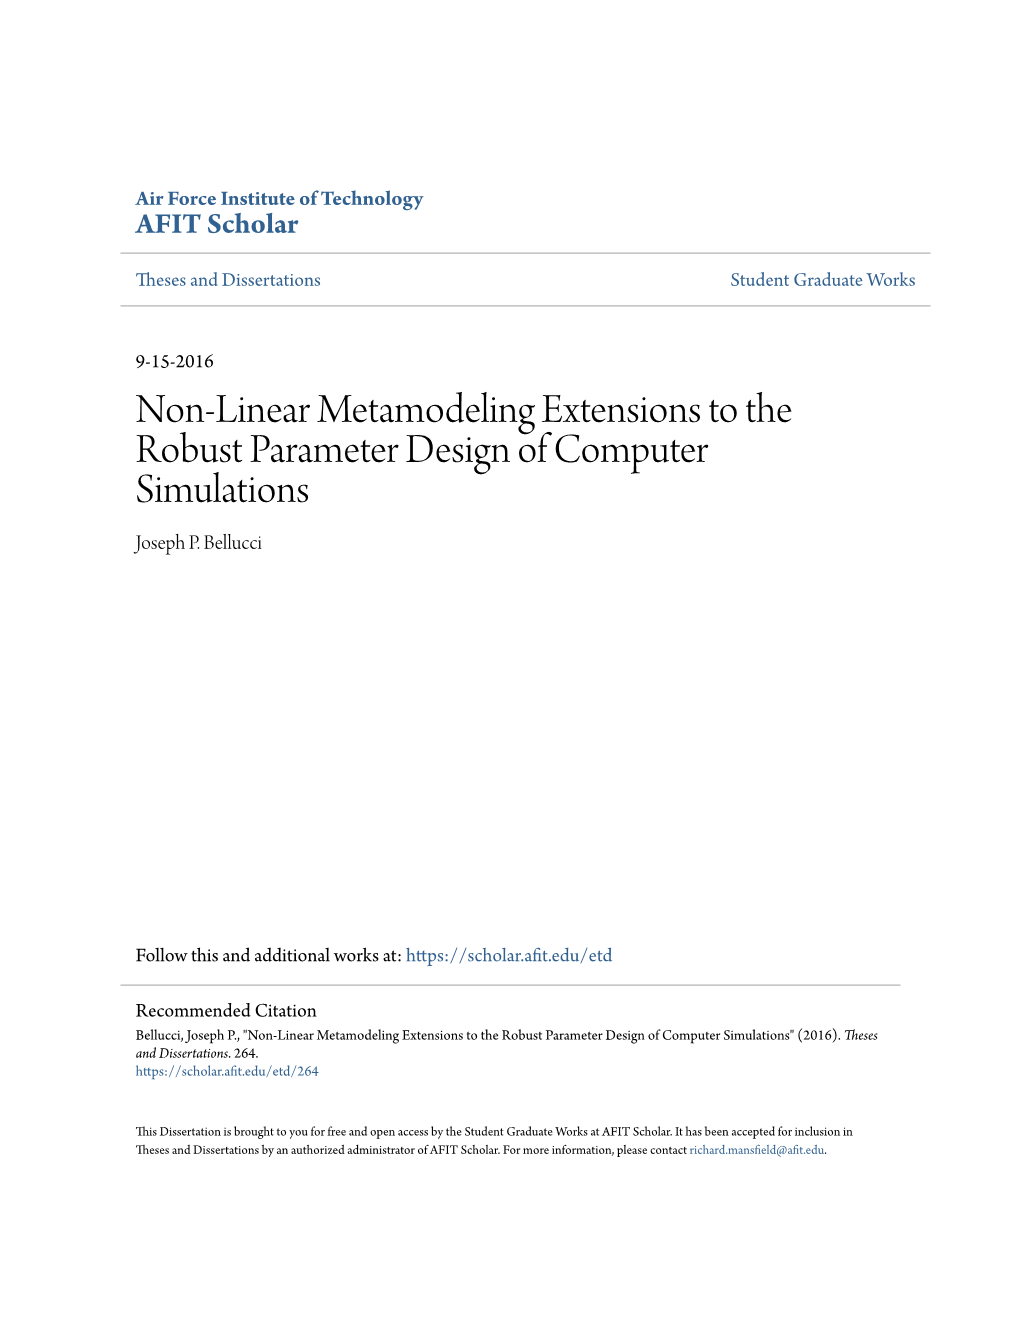 Non-Linear Metamodeling Extensions to the Robust Parameter Design of Computer Simulations Joseph P